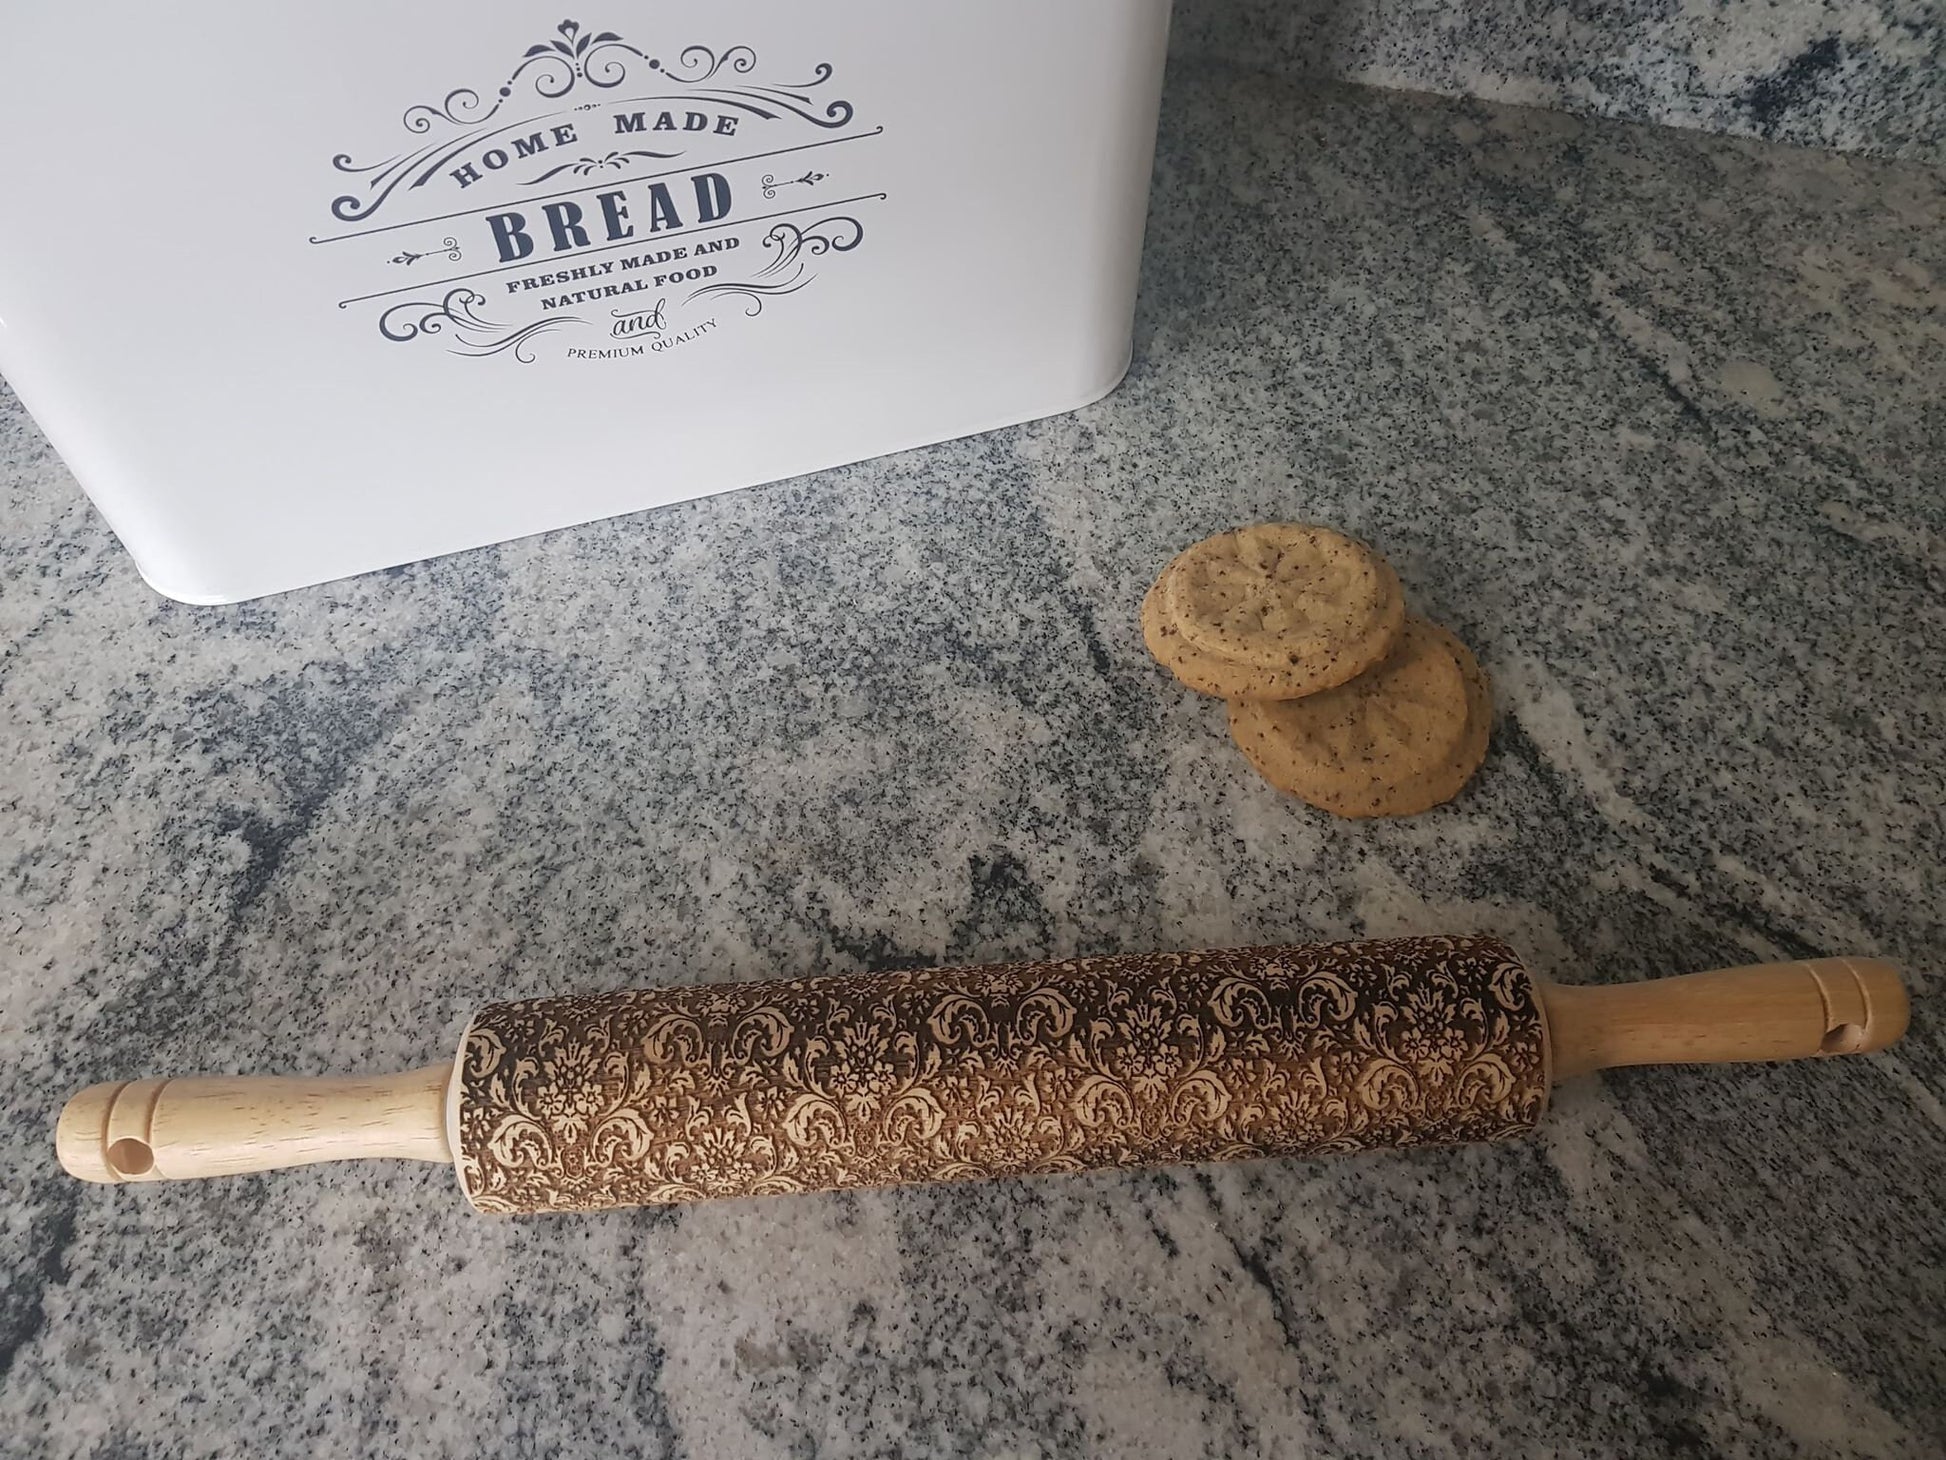 Flourish, Texture, Embossed, Engraved, Wooden Rolling Pin, Cookie Stamp, Laser, Hardwood 10 inch, Design, Pattern, Nature, pottery floral